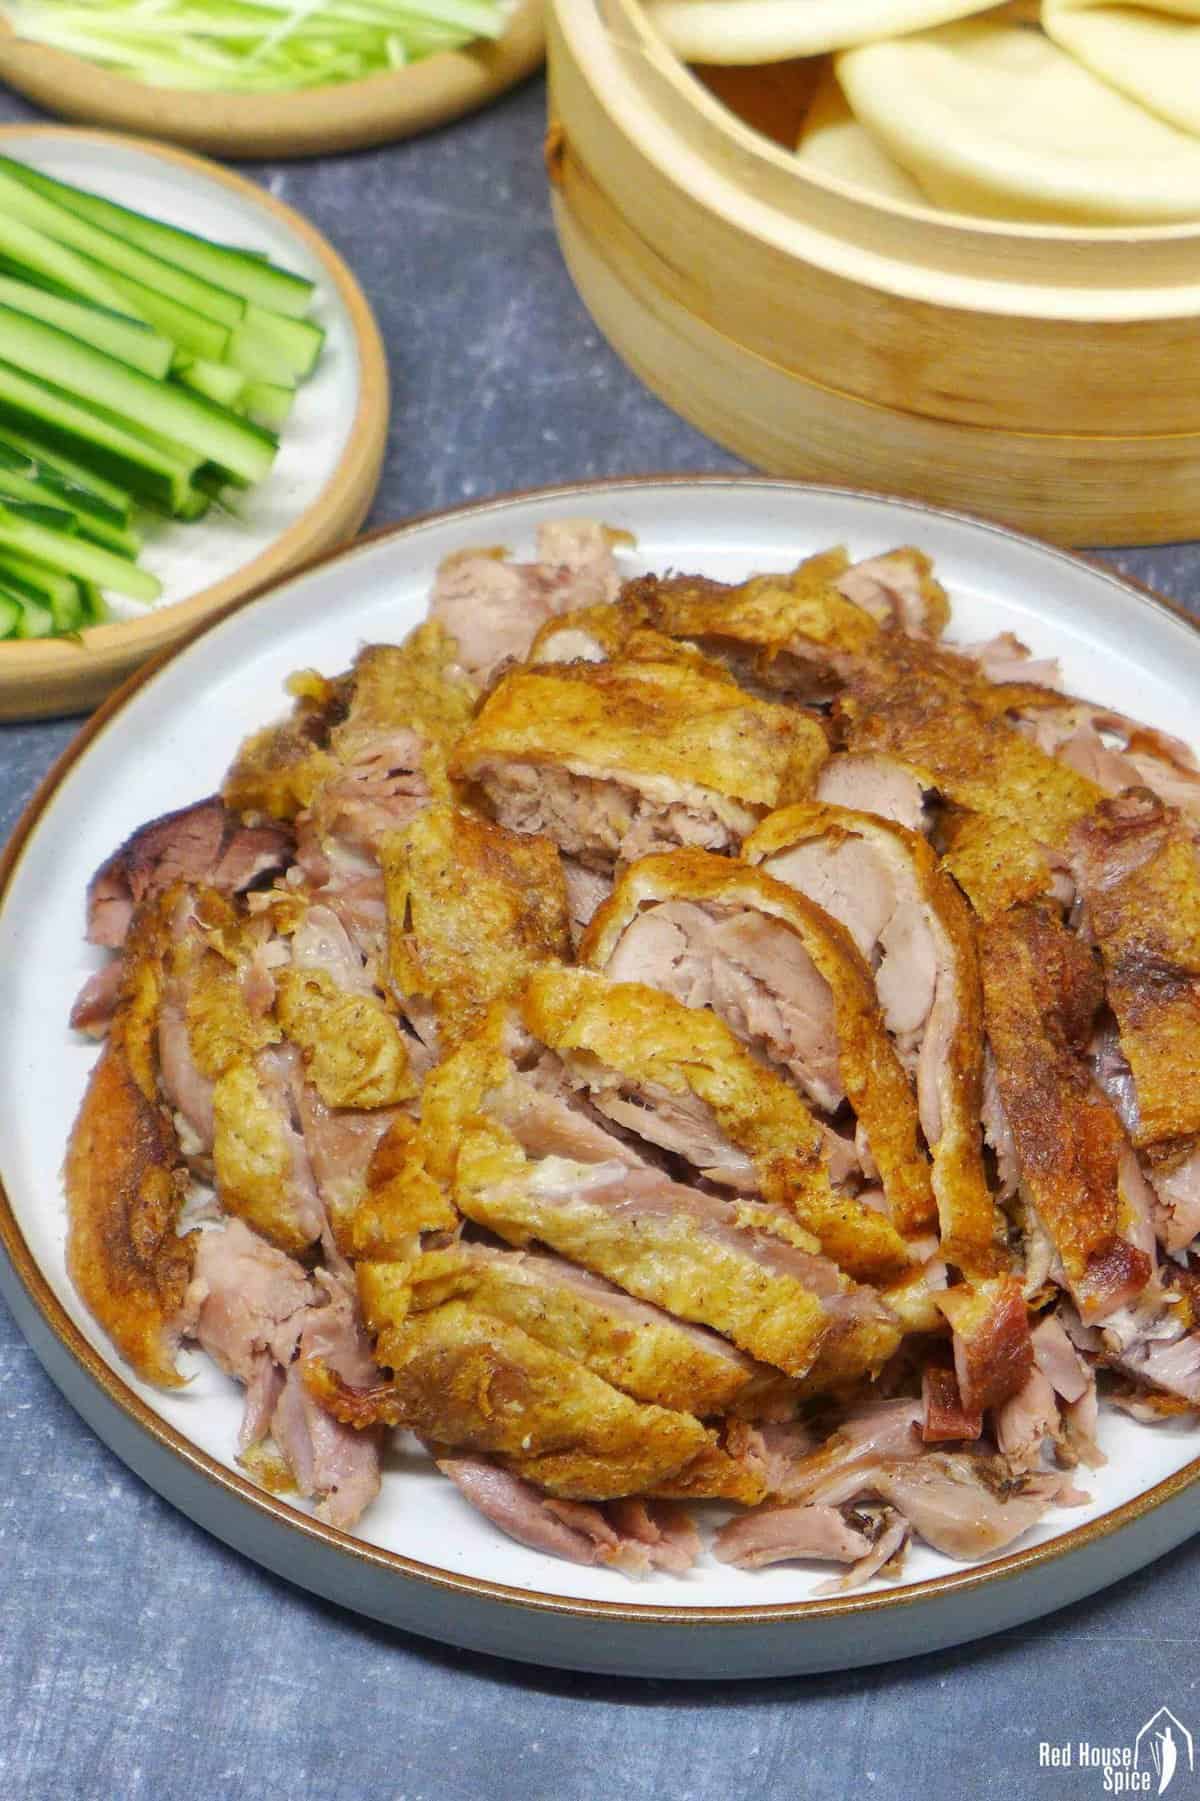 A plate of aromatic crispy duck.